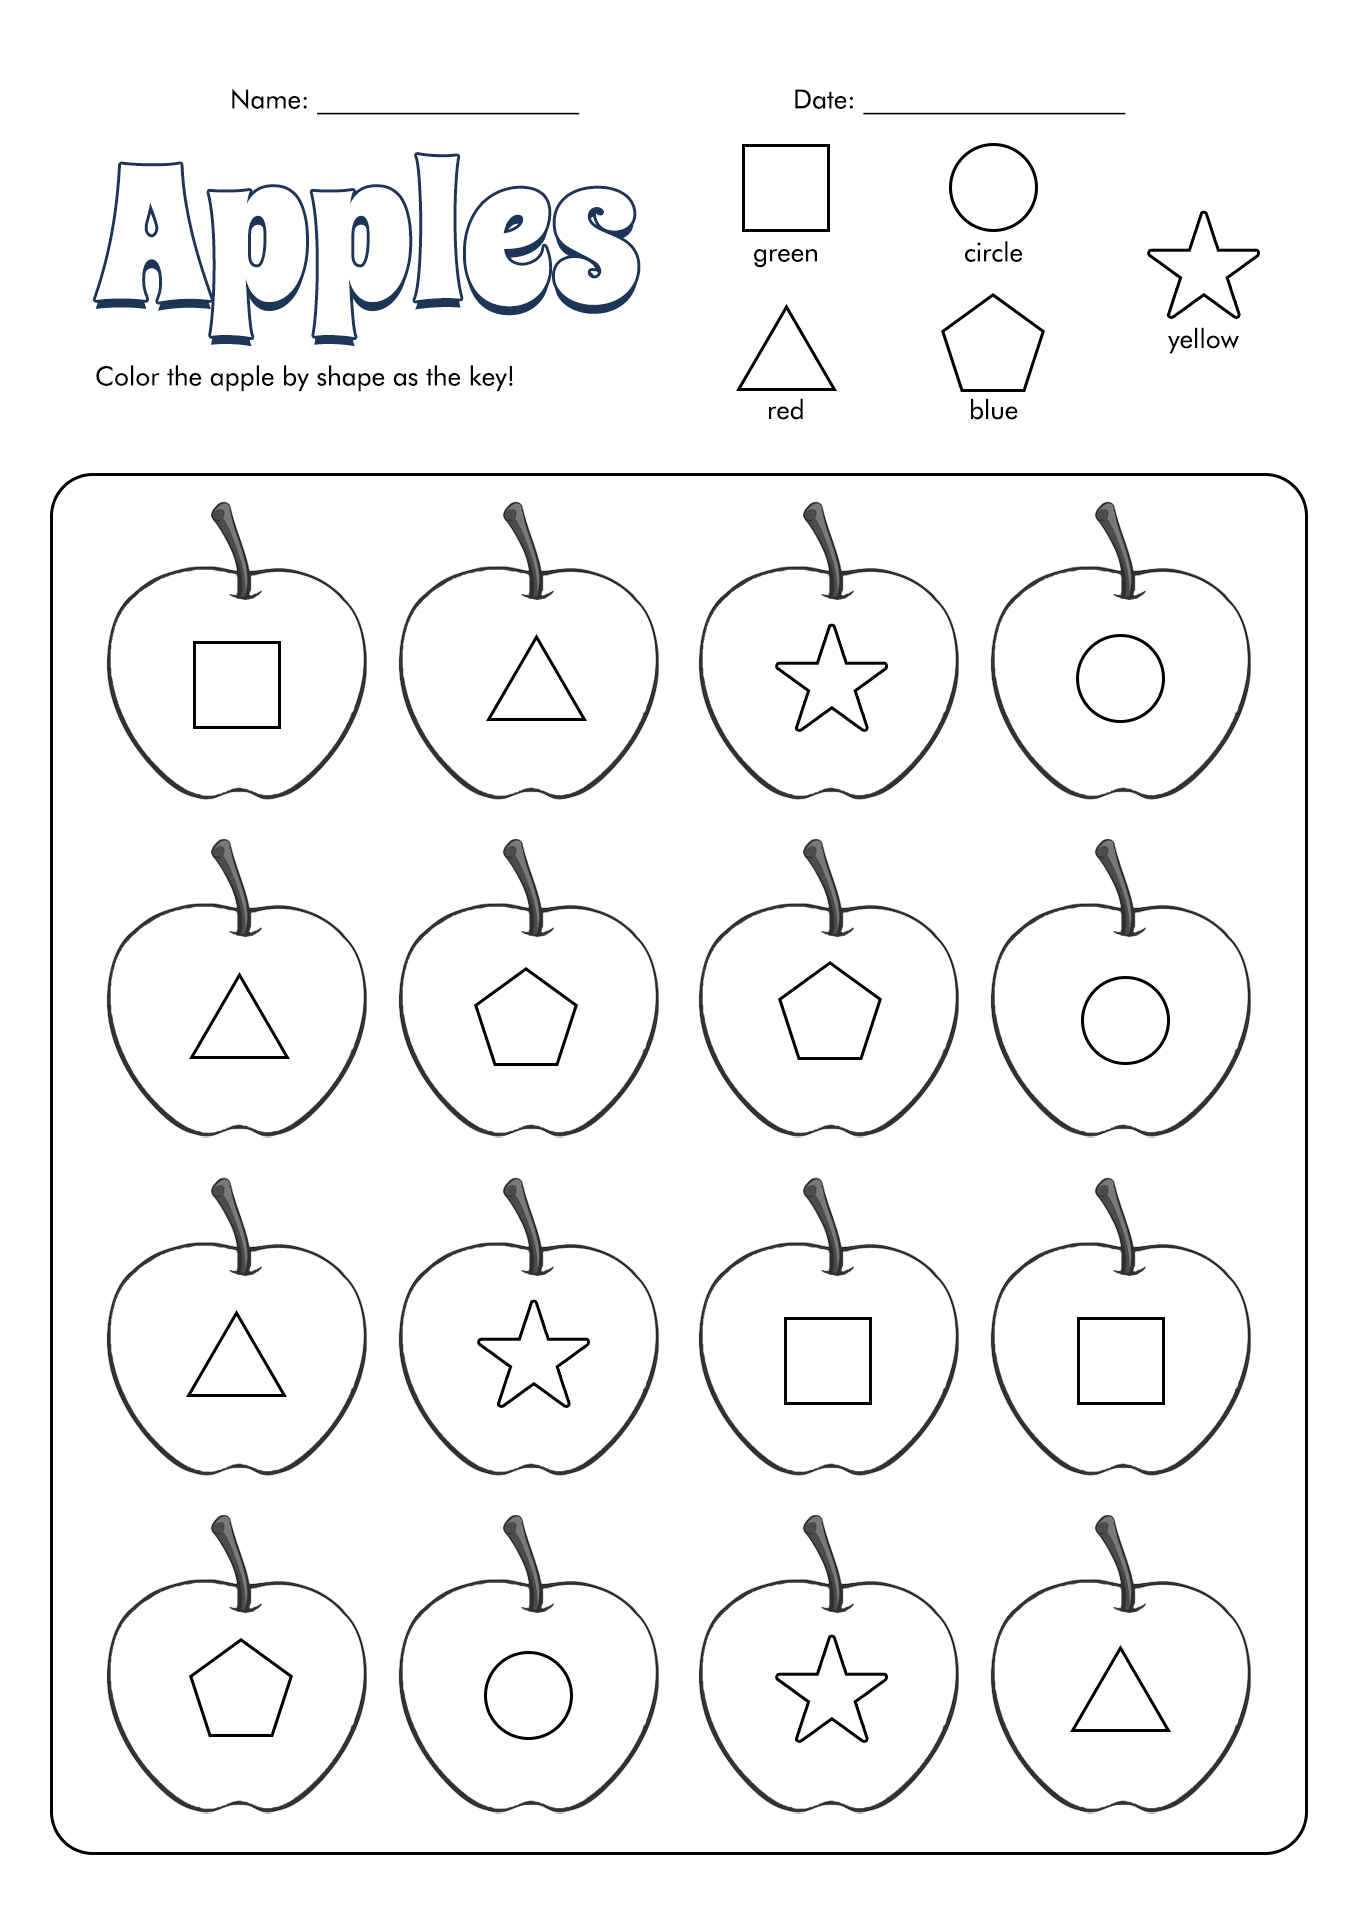 13 Best Images of Apple Activity Worksheets Apple Counting Printable